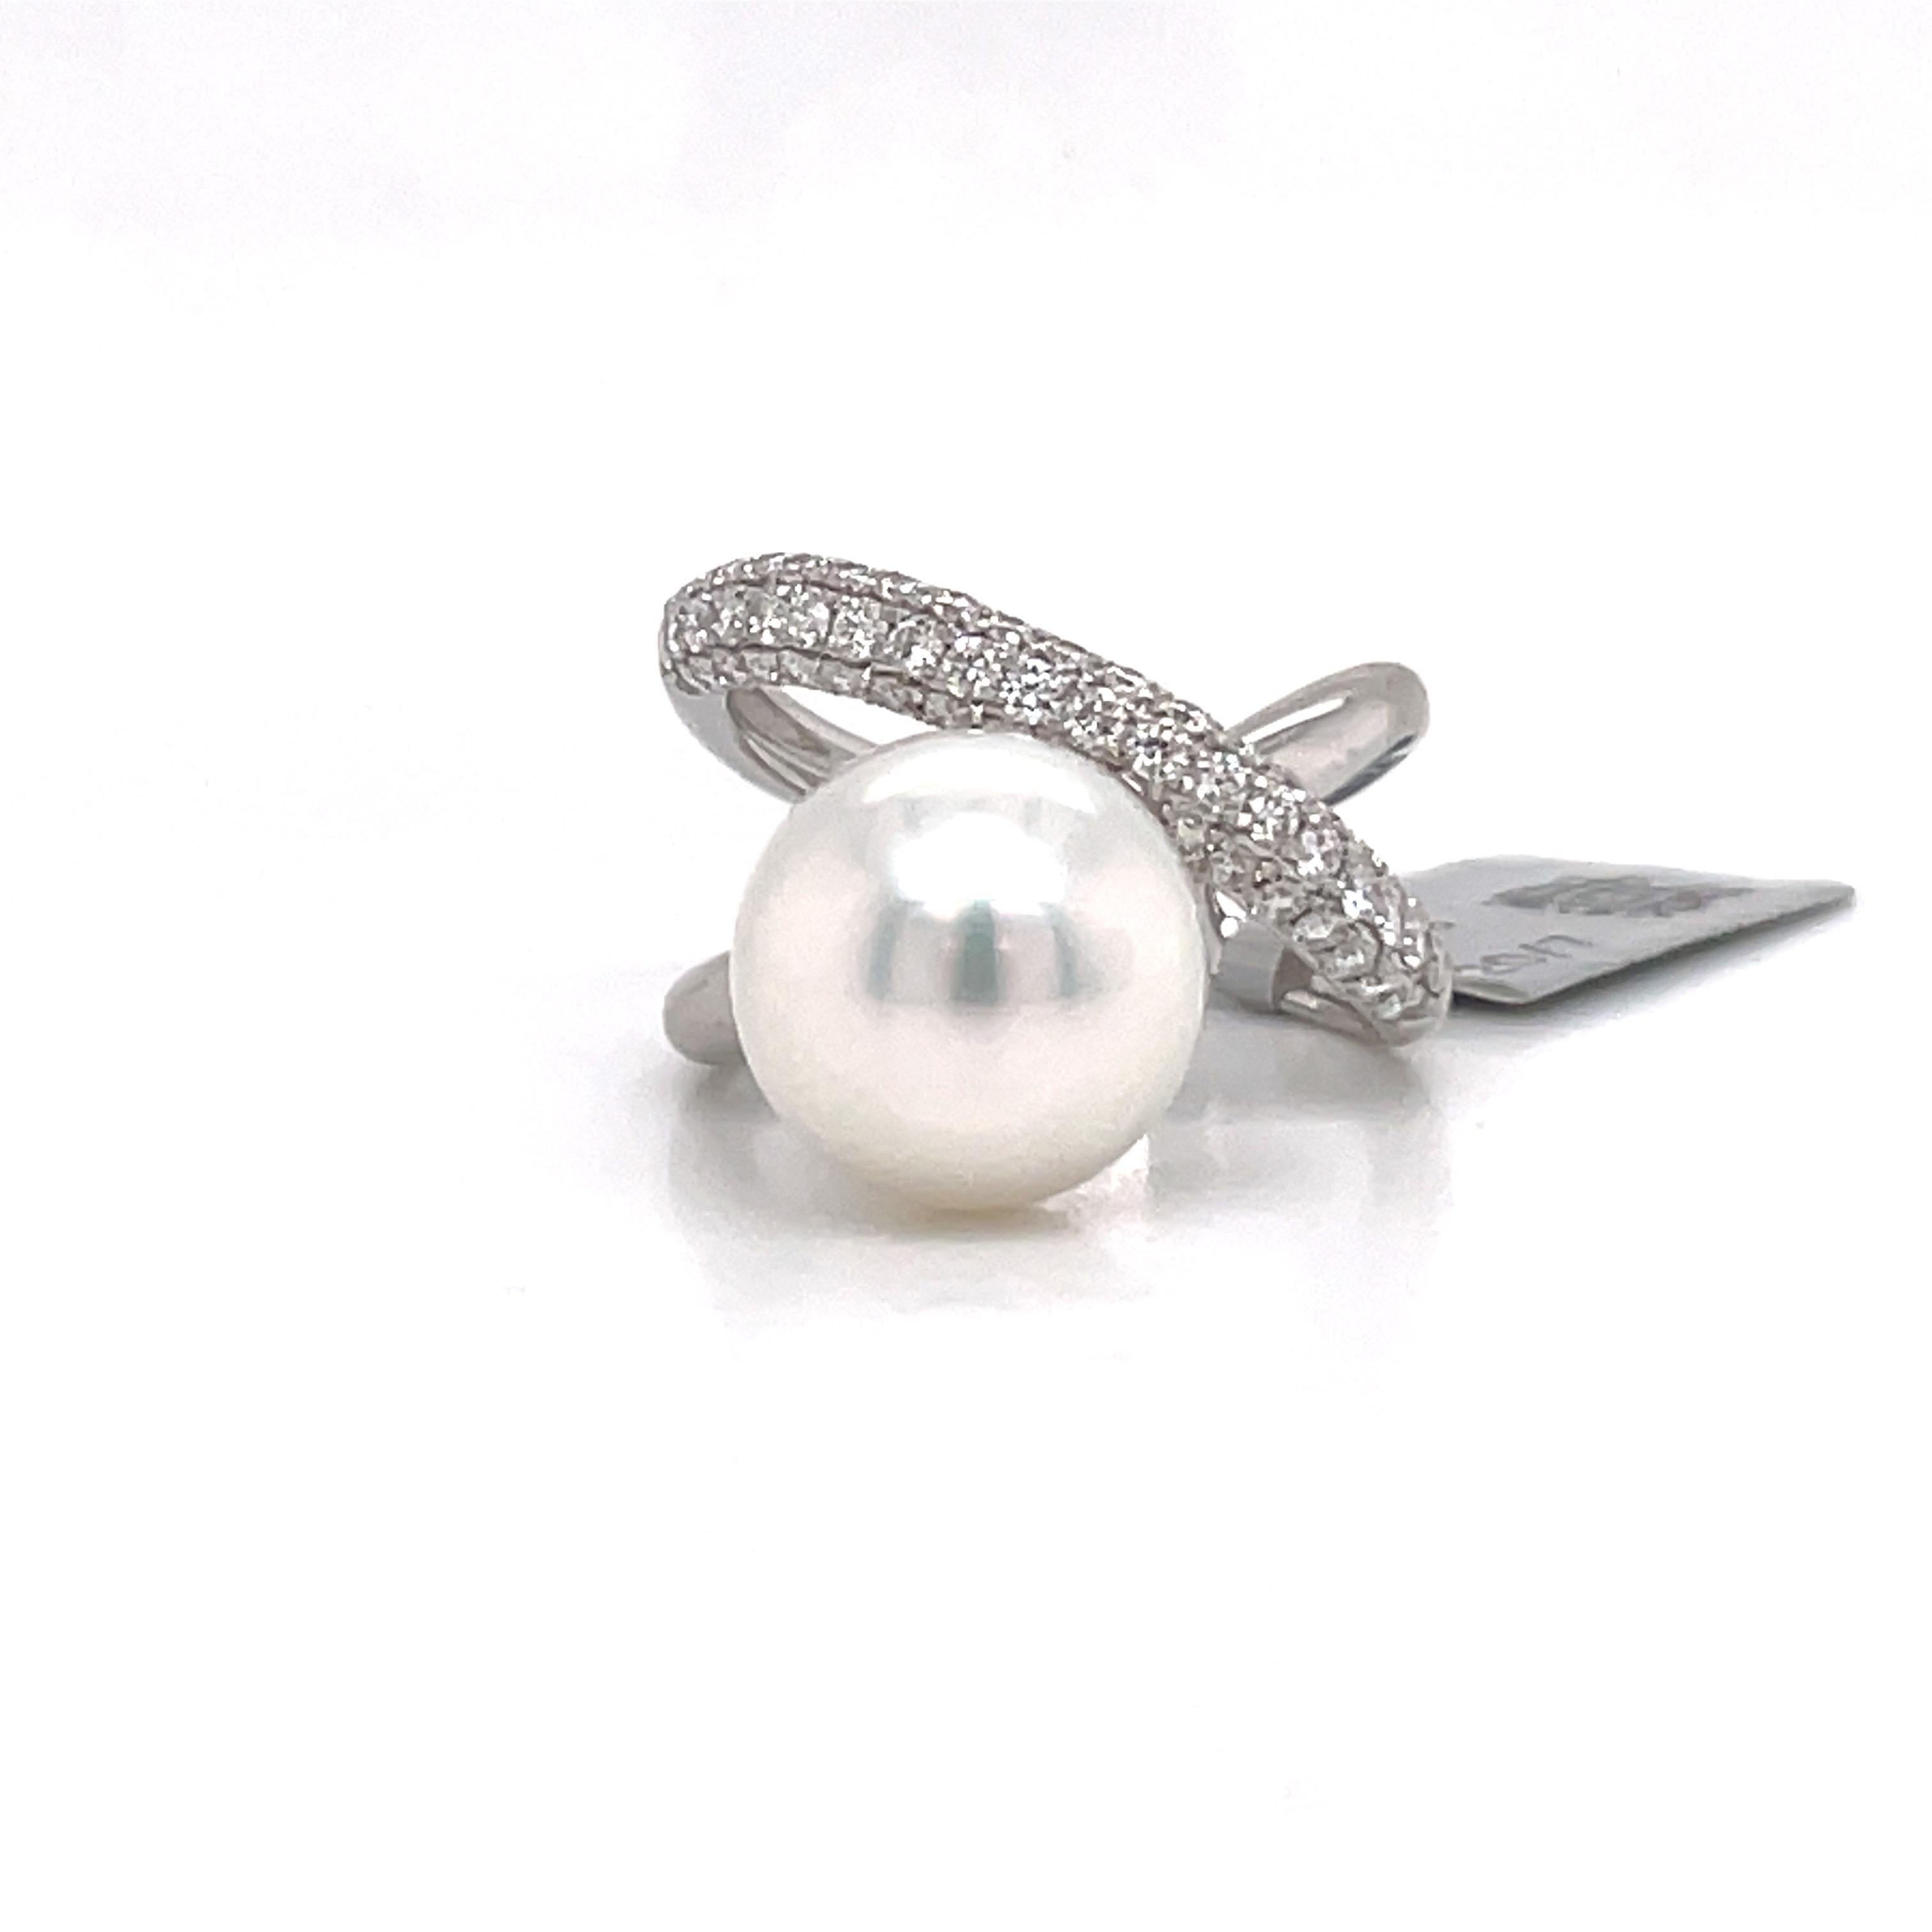 18 Karat White gold fashion X design ring featuring one white South Sea Pearl measuring 11-12 MM flanked with 53 round brilliants weighing 0.76 carats.
Color G-H
Clarity SI